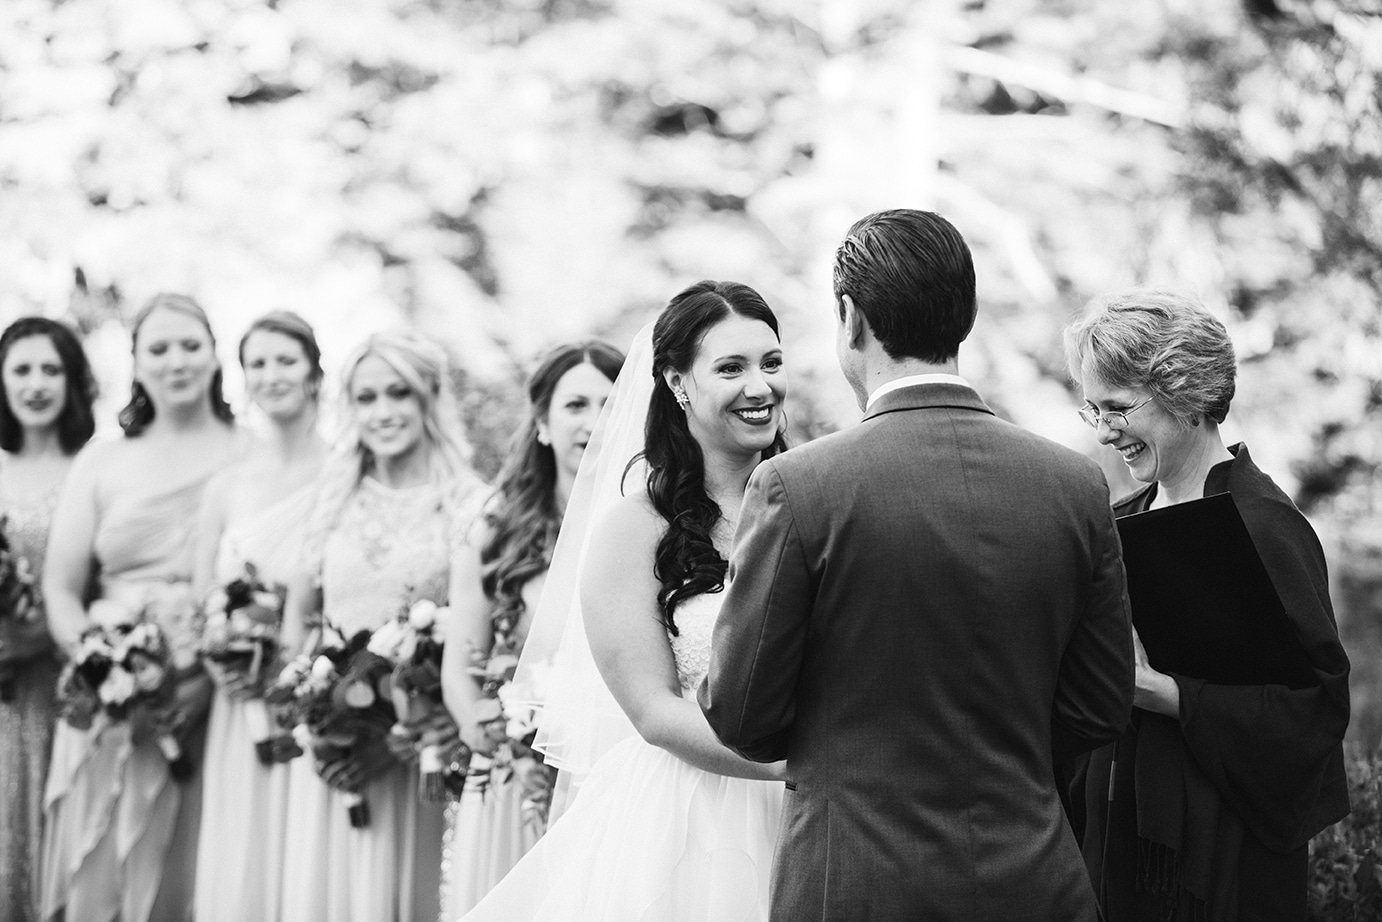 A documentary photograph of a bride smiling at her groom during their outdoor wedding ceremony at Harrington Farm in Princeton, Massachusetts